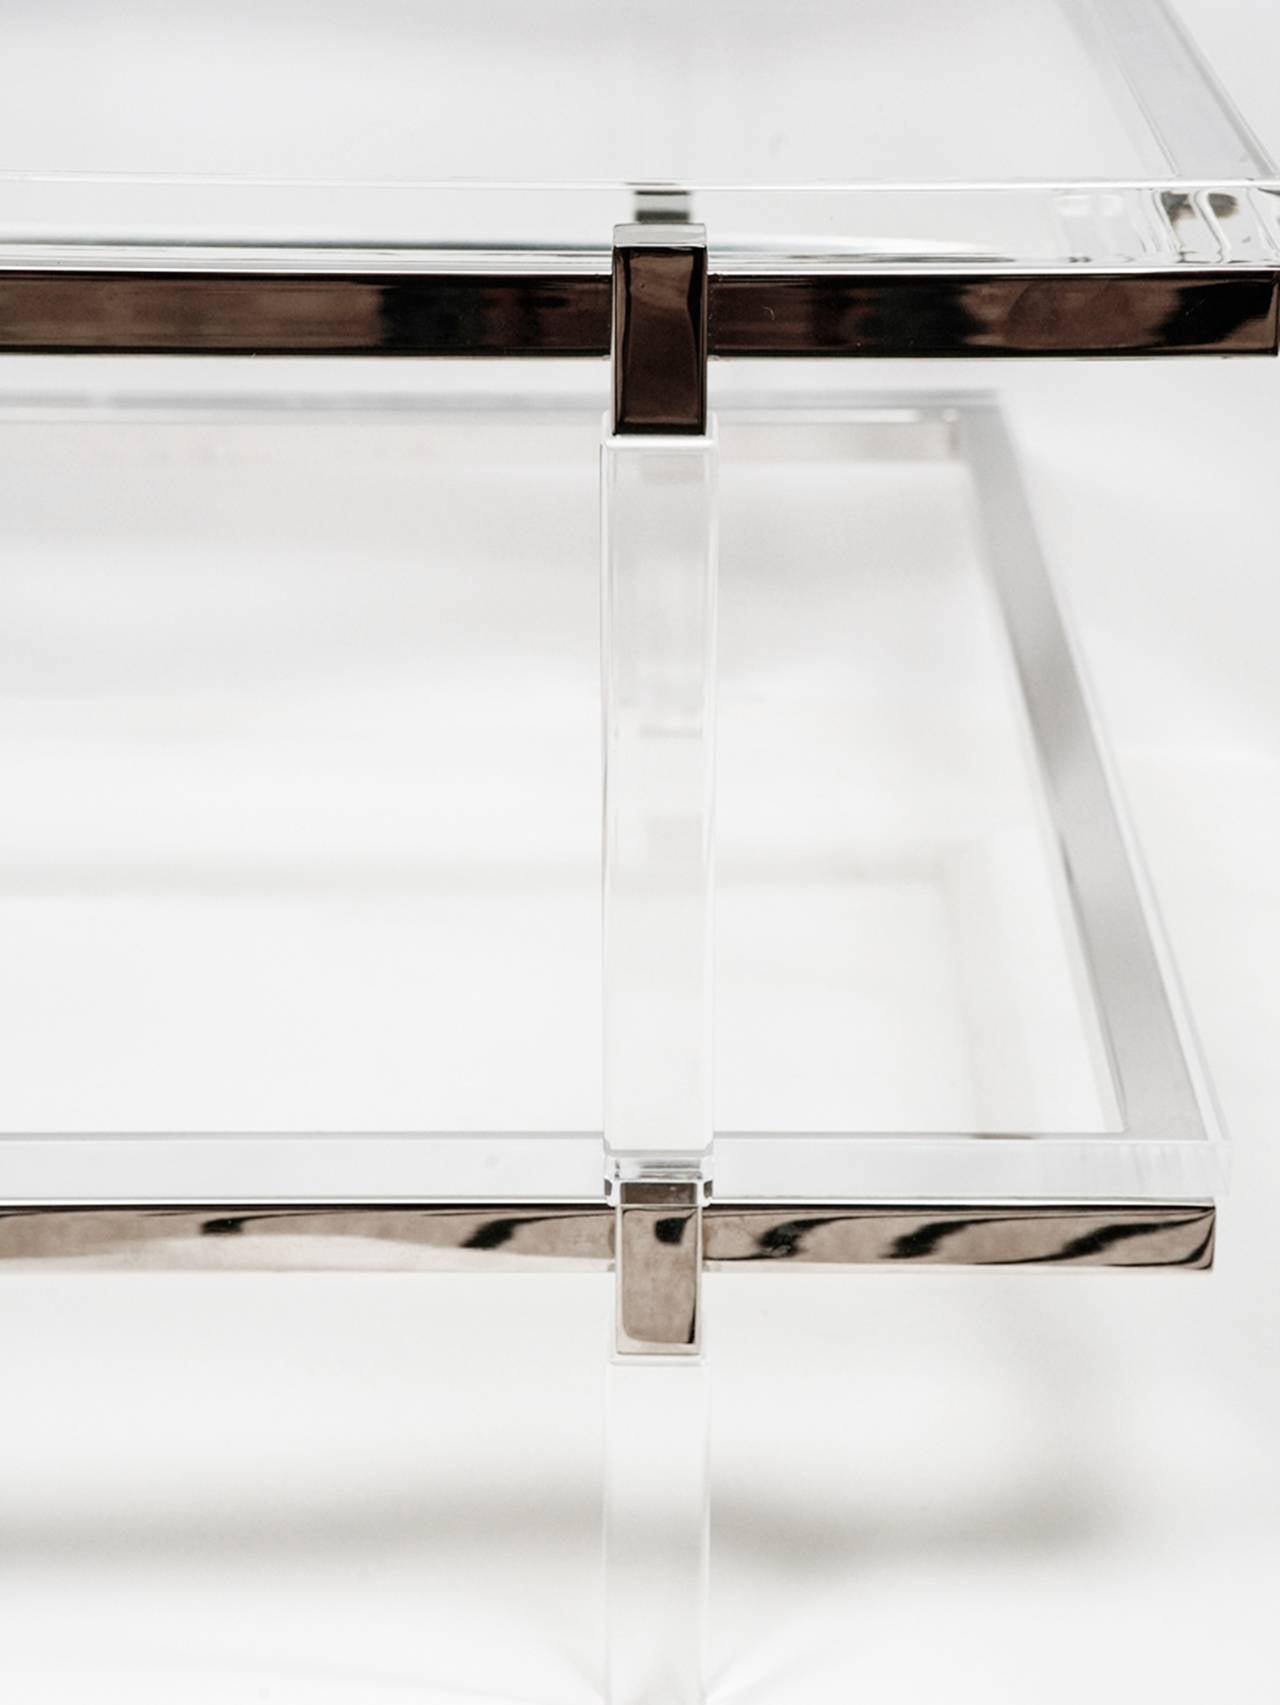 Two-level coffee or cocktail table designed and manufactured by the Icon of Lucite Charles Hollis Jones as part of the Metric collection designed in the 1960s.

The table is executed in Lucite and nickel topped with a 1